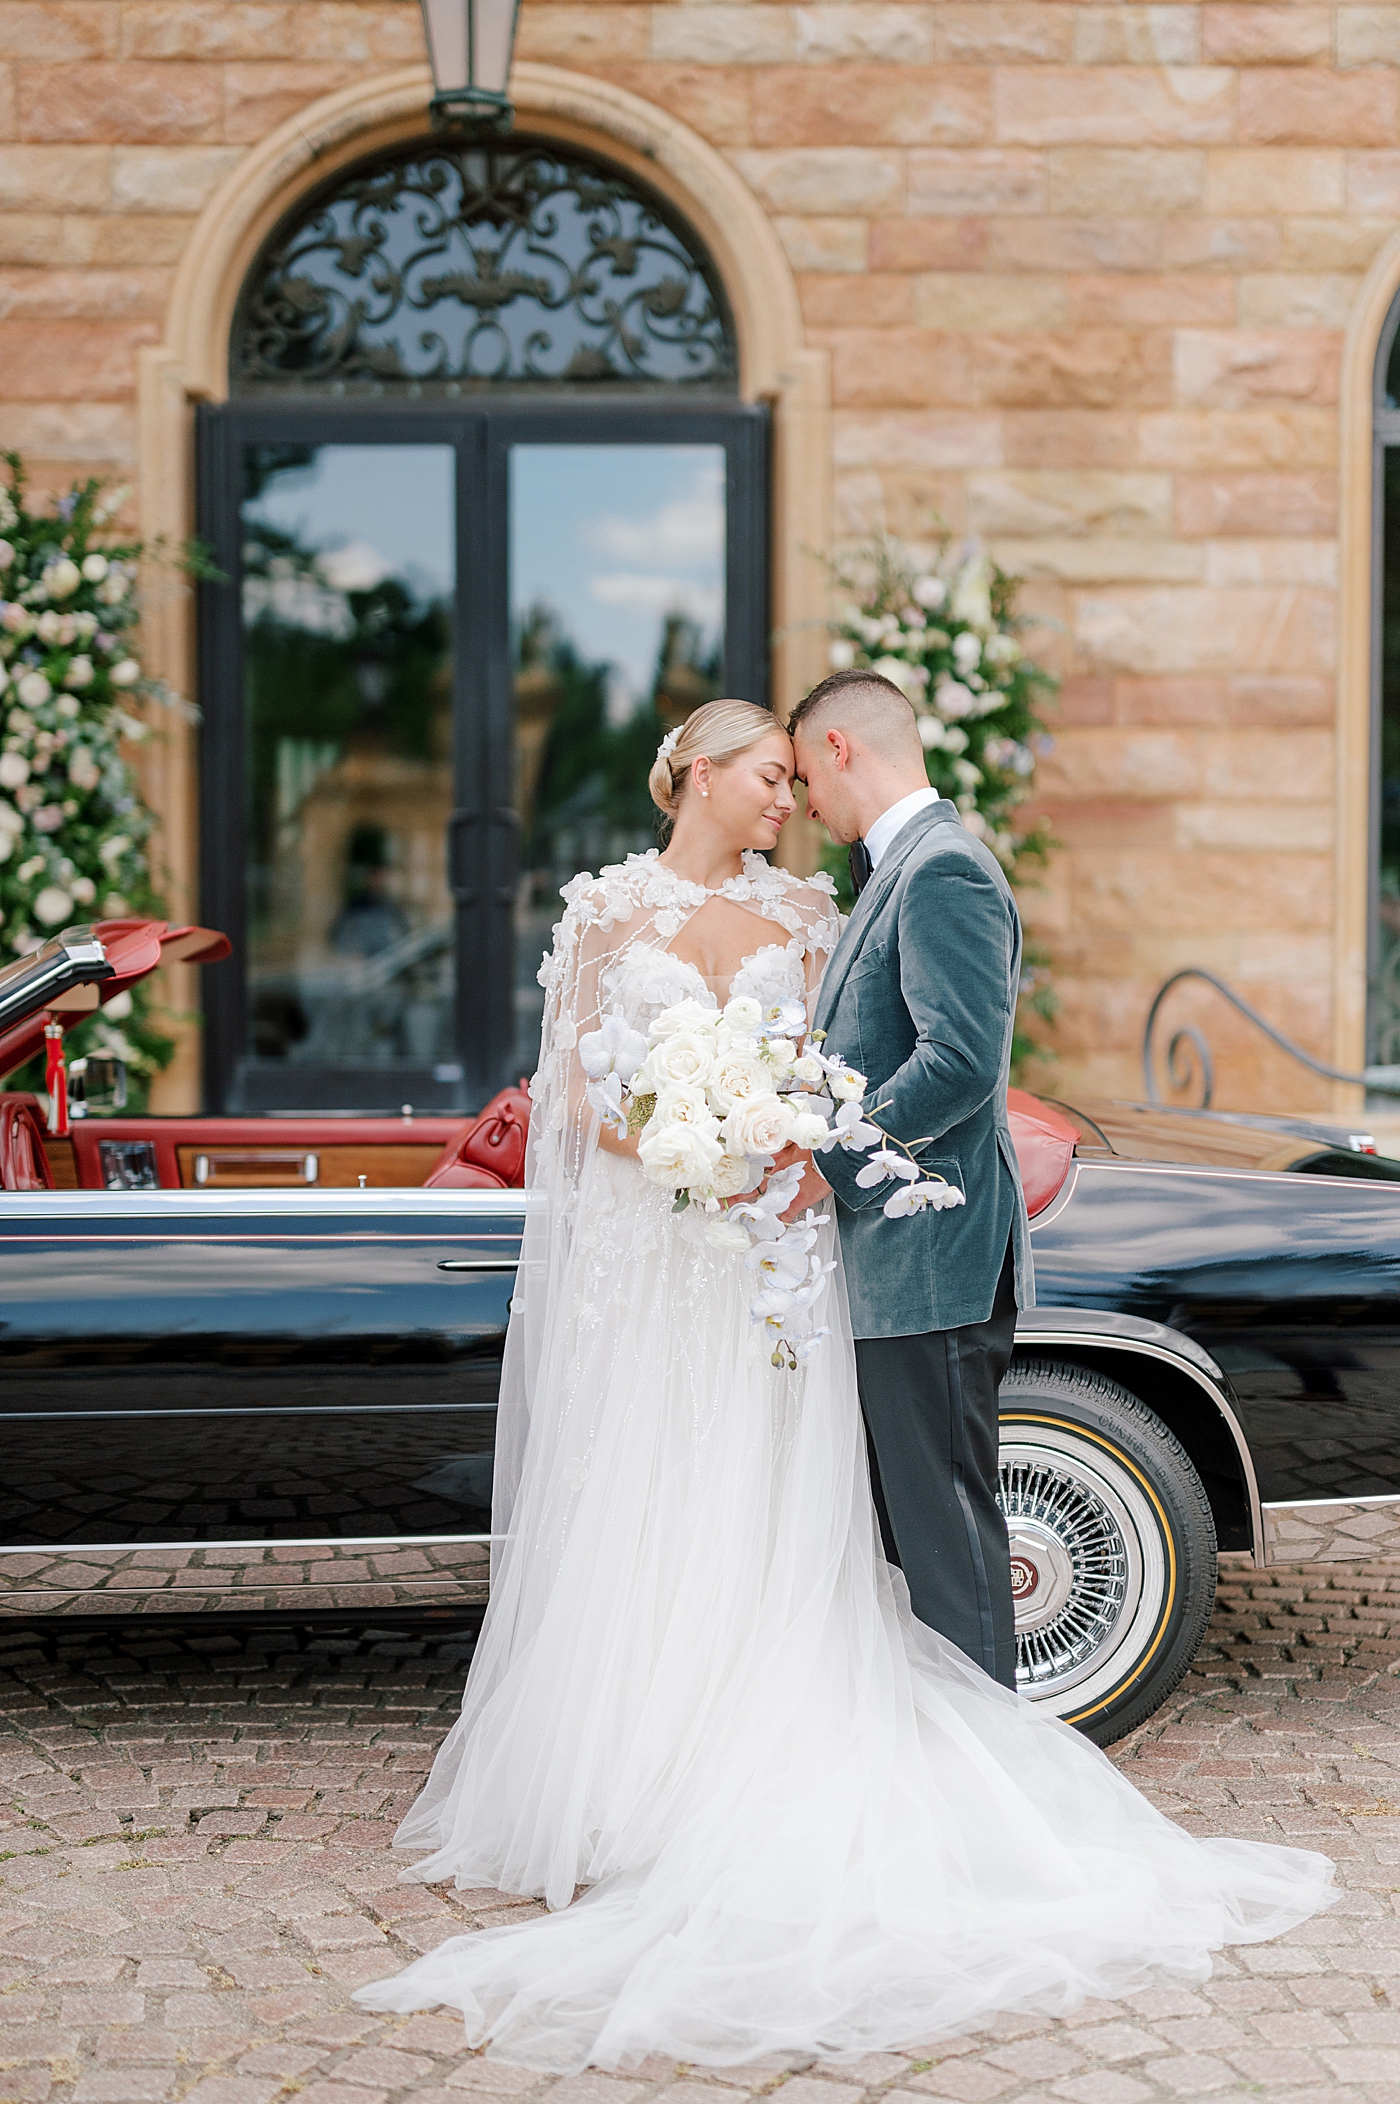 Bride and groom portraits with vintage car | Image by Hope Helmuth Photography